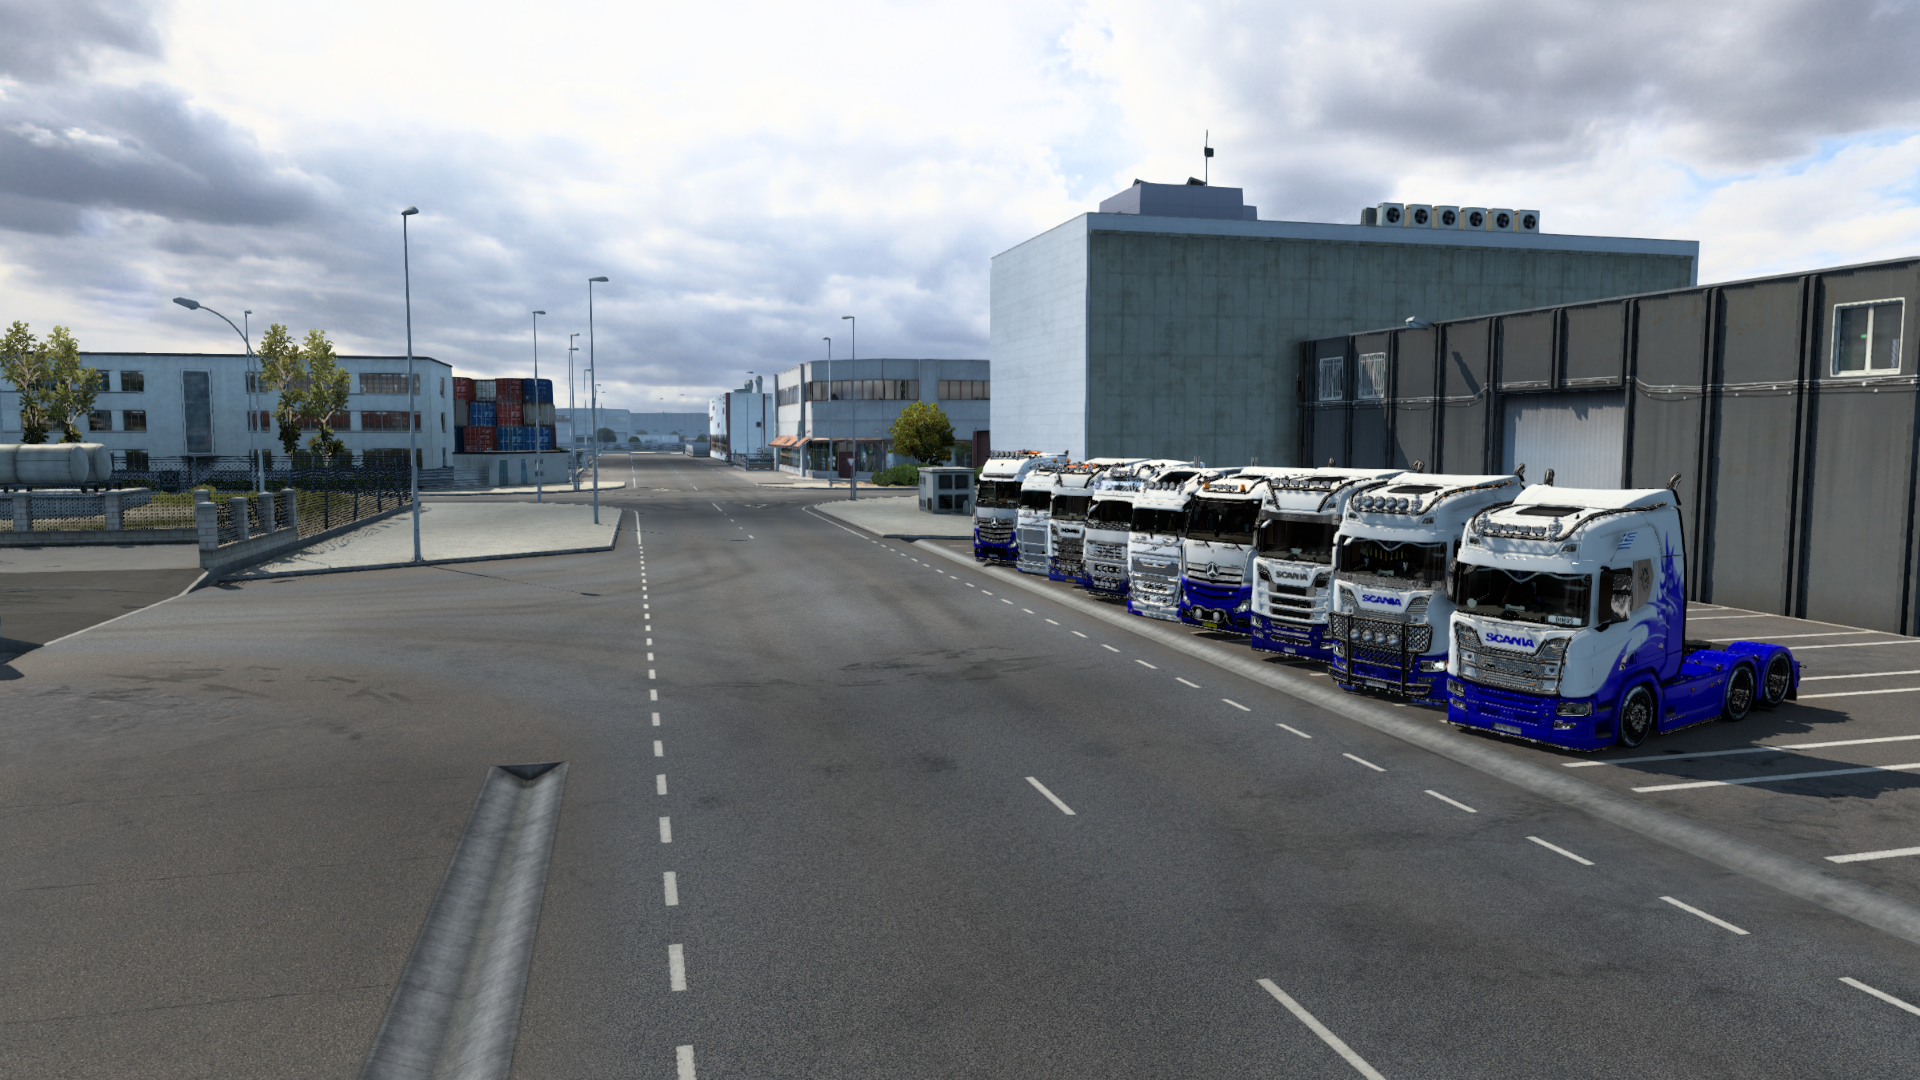 ets2_20220930_234555_00.png